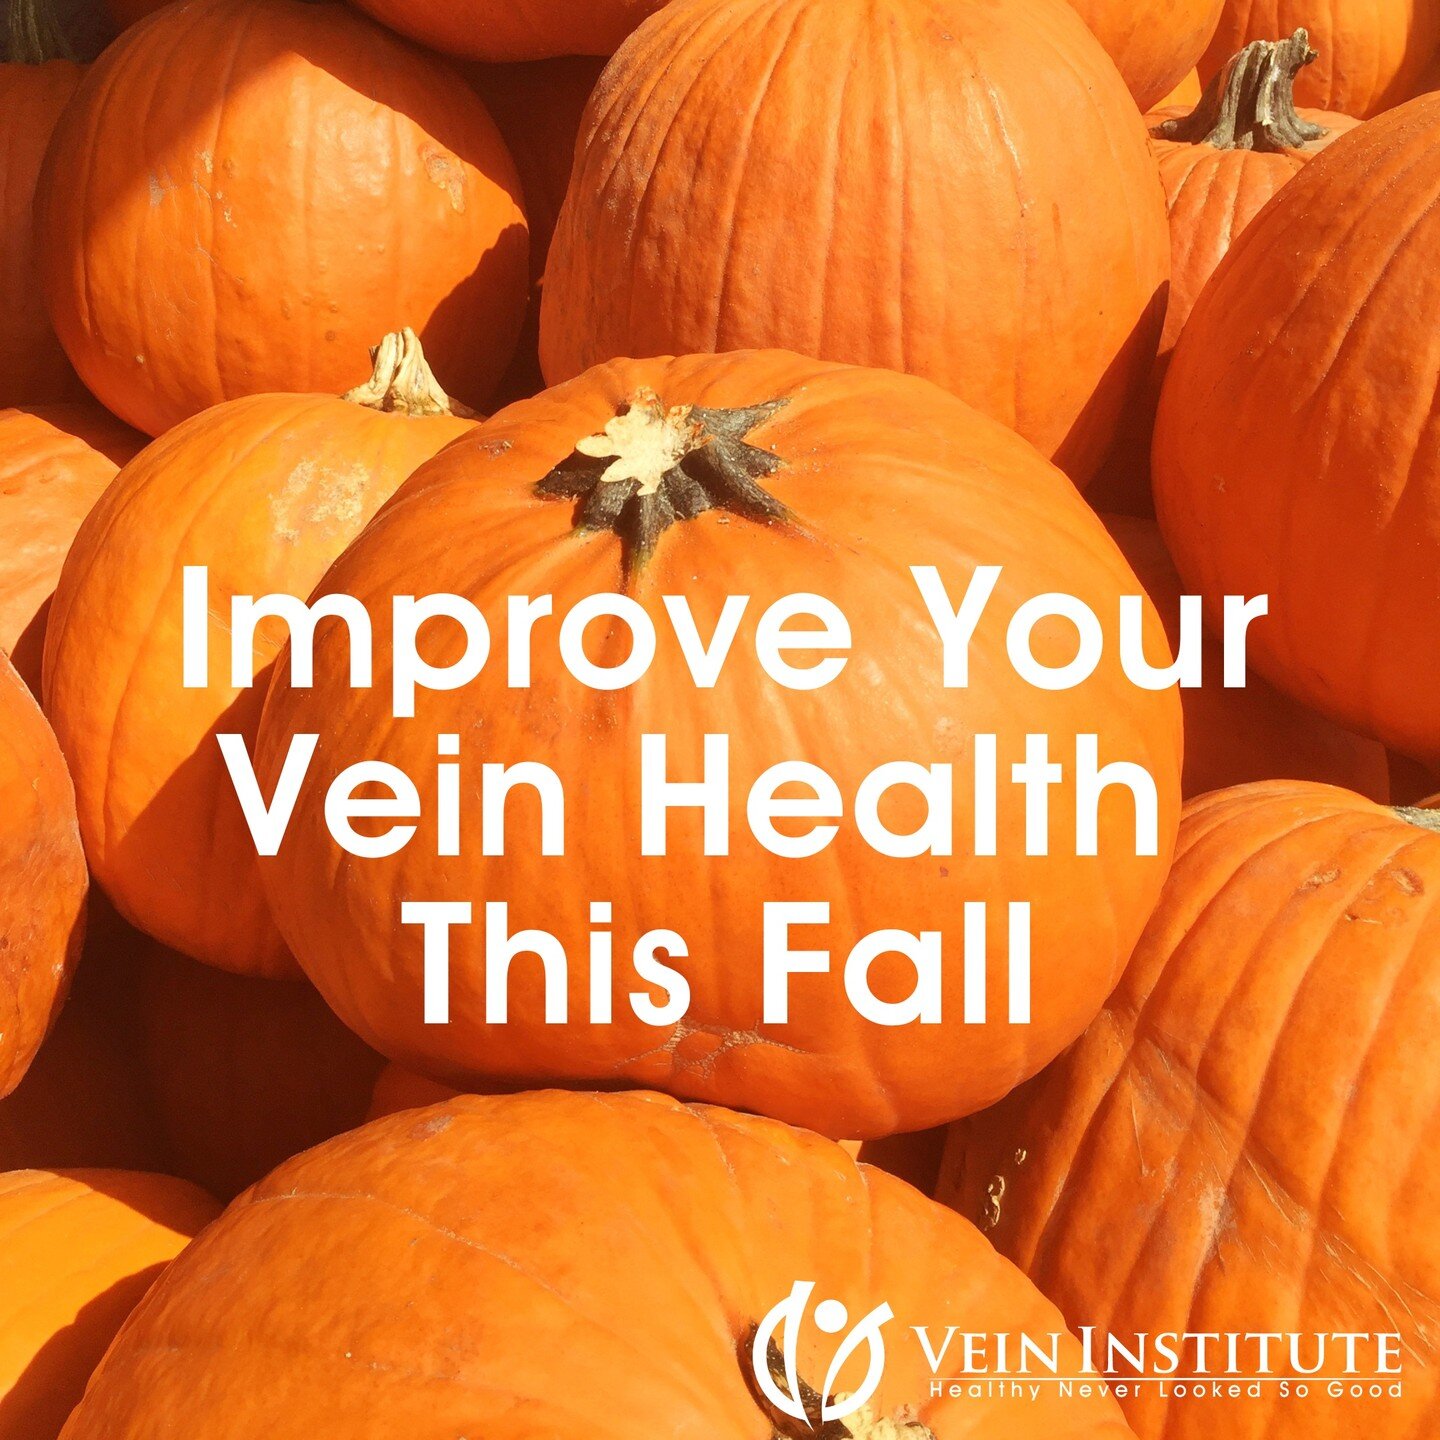 #PSL Season is here....and by that we mean Phlebologists Savings Legs 🎃 That's just as good right?

A top tip from our team to Improve Your Vein Health This Fall...Eat Autumn Foods!
What&rsquo;s not to love about the delicious bounty of fall? Crisp,